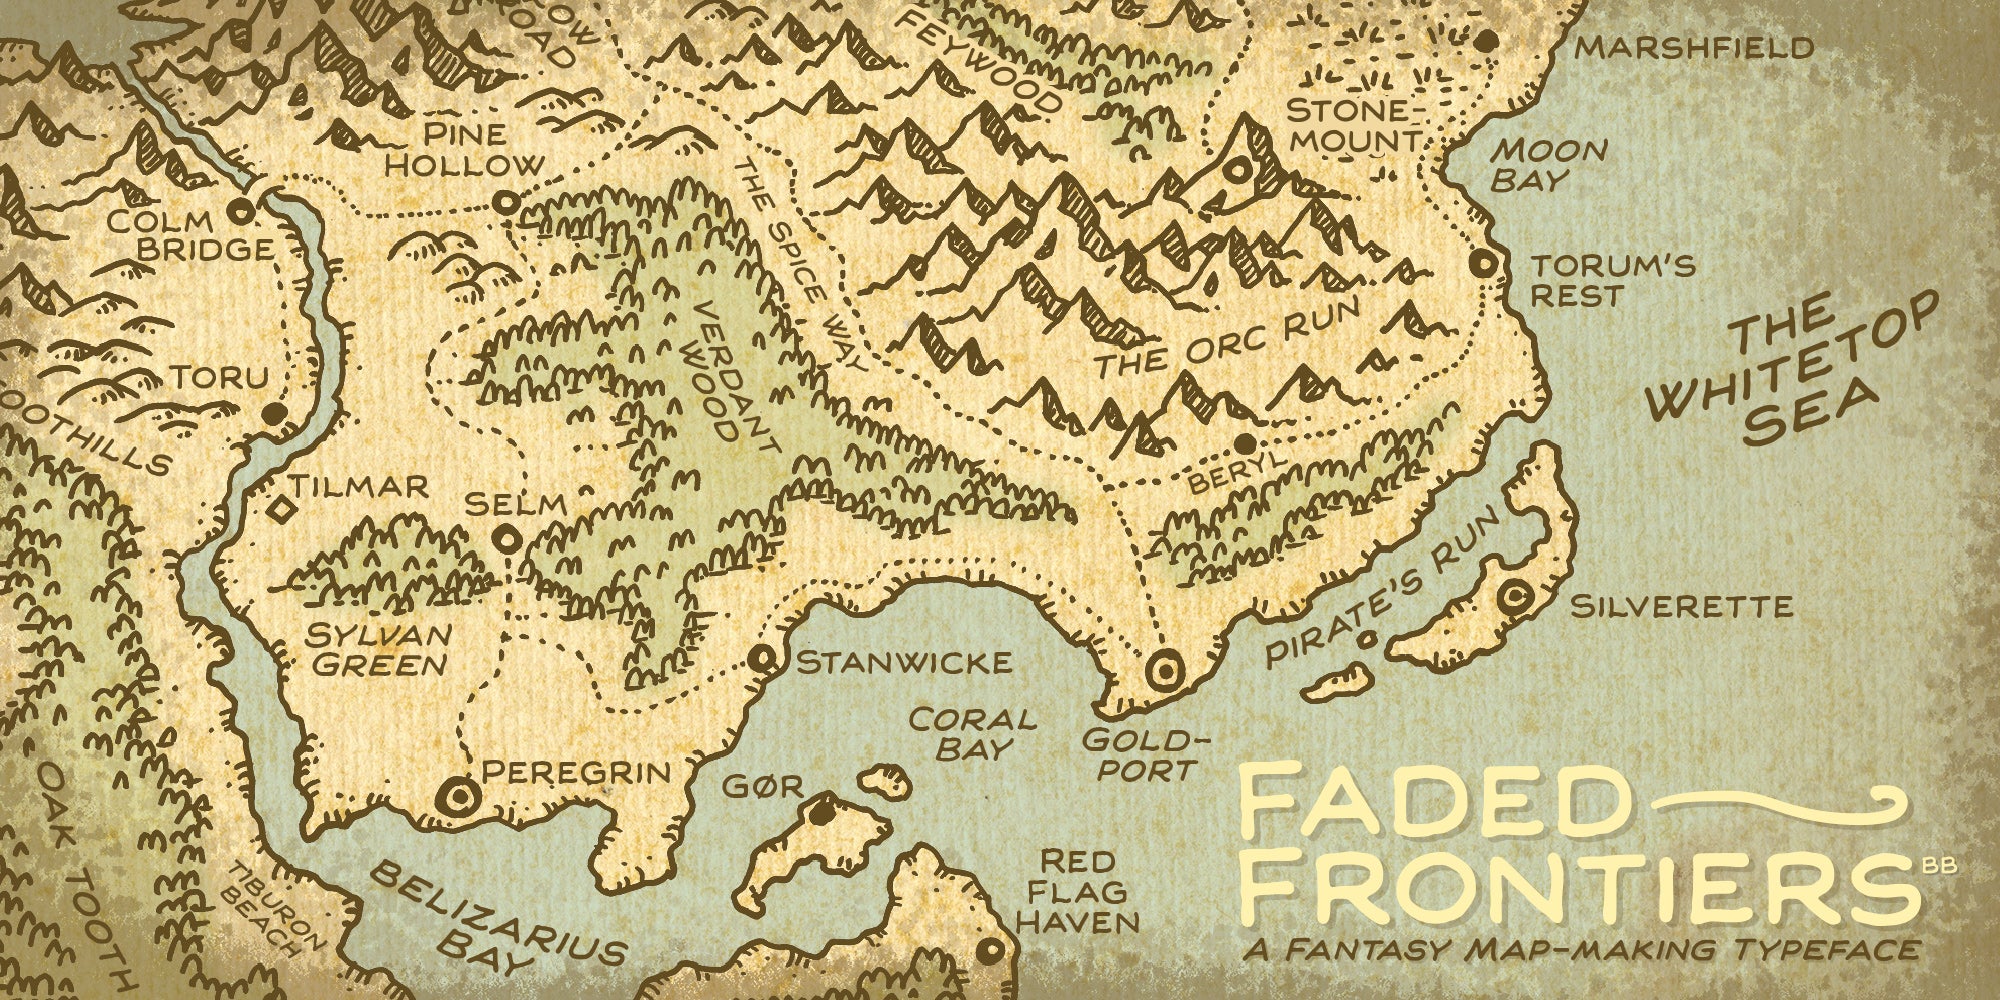 Faded Frontiers